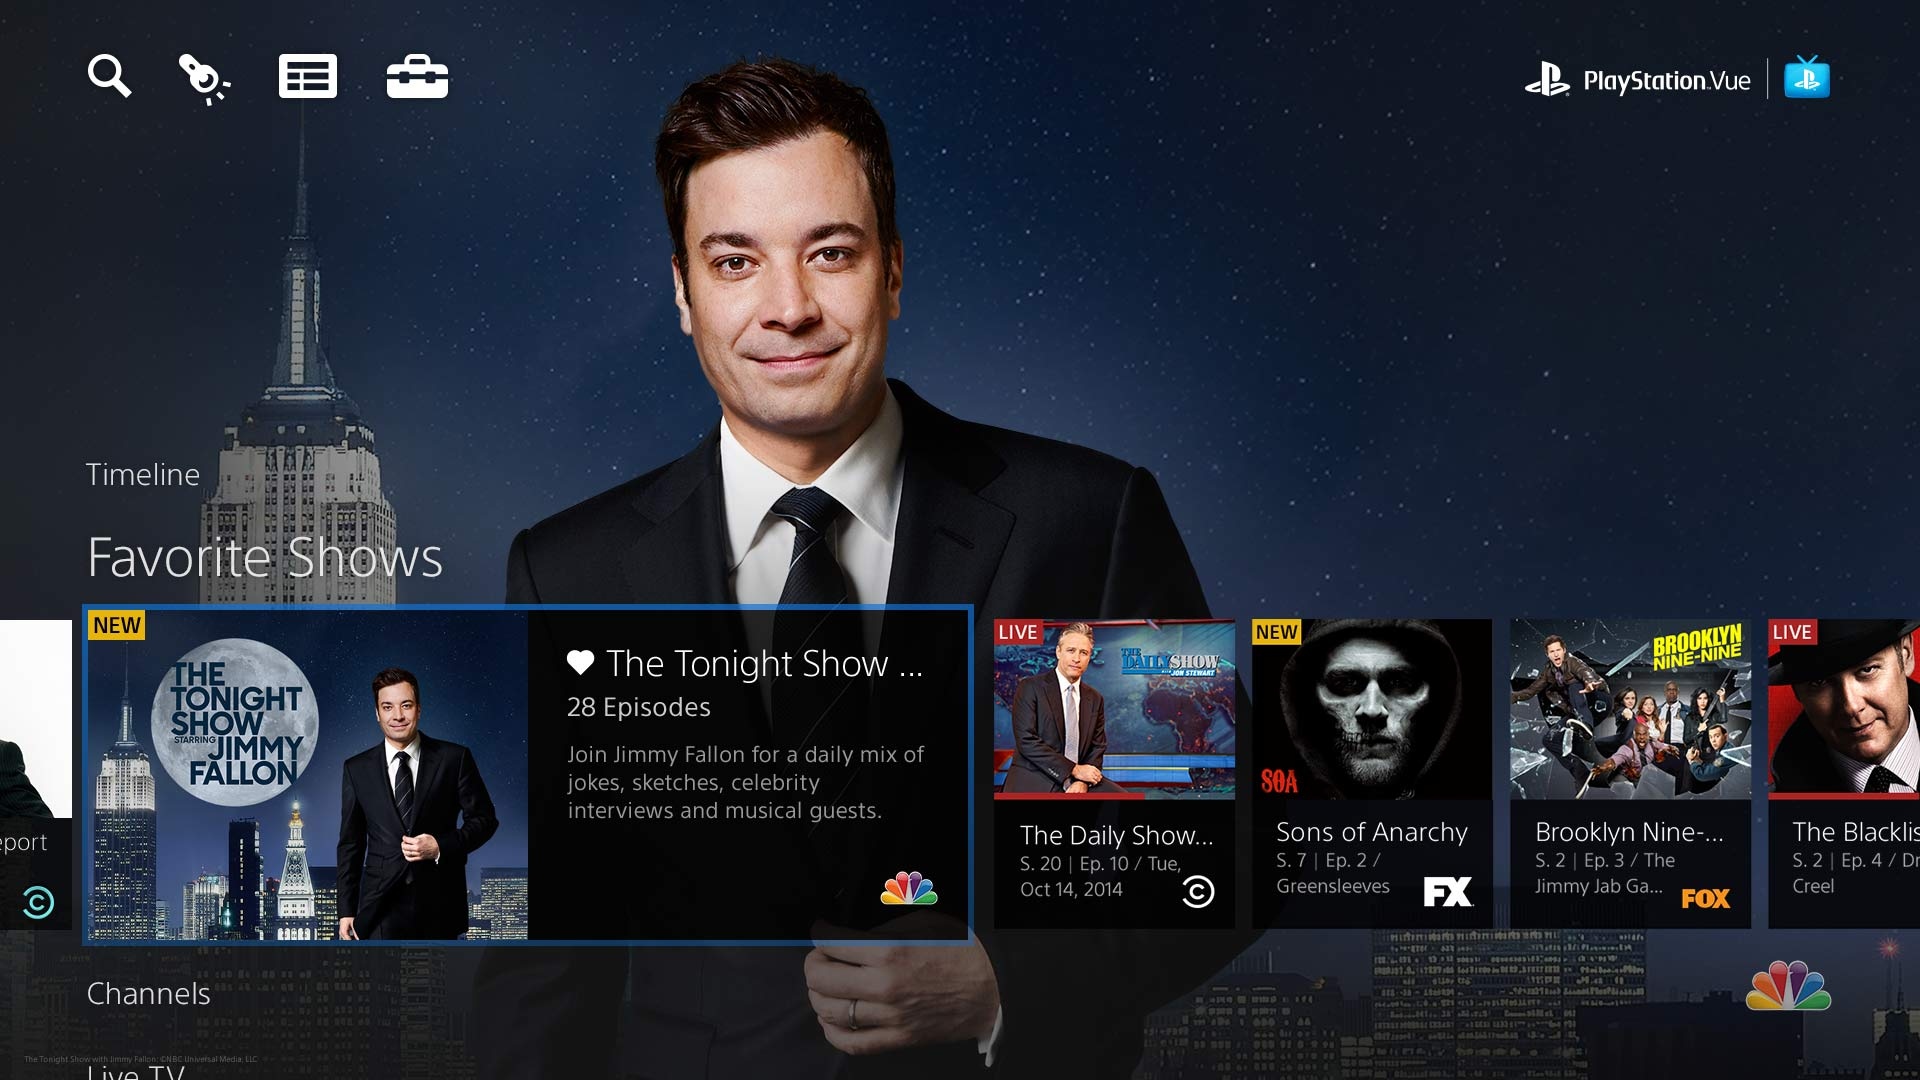 PlayStation Vue Today Updated Their Android App With a New Guide & More